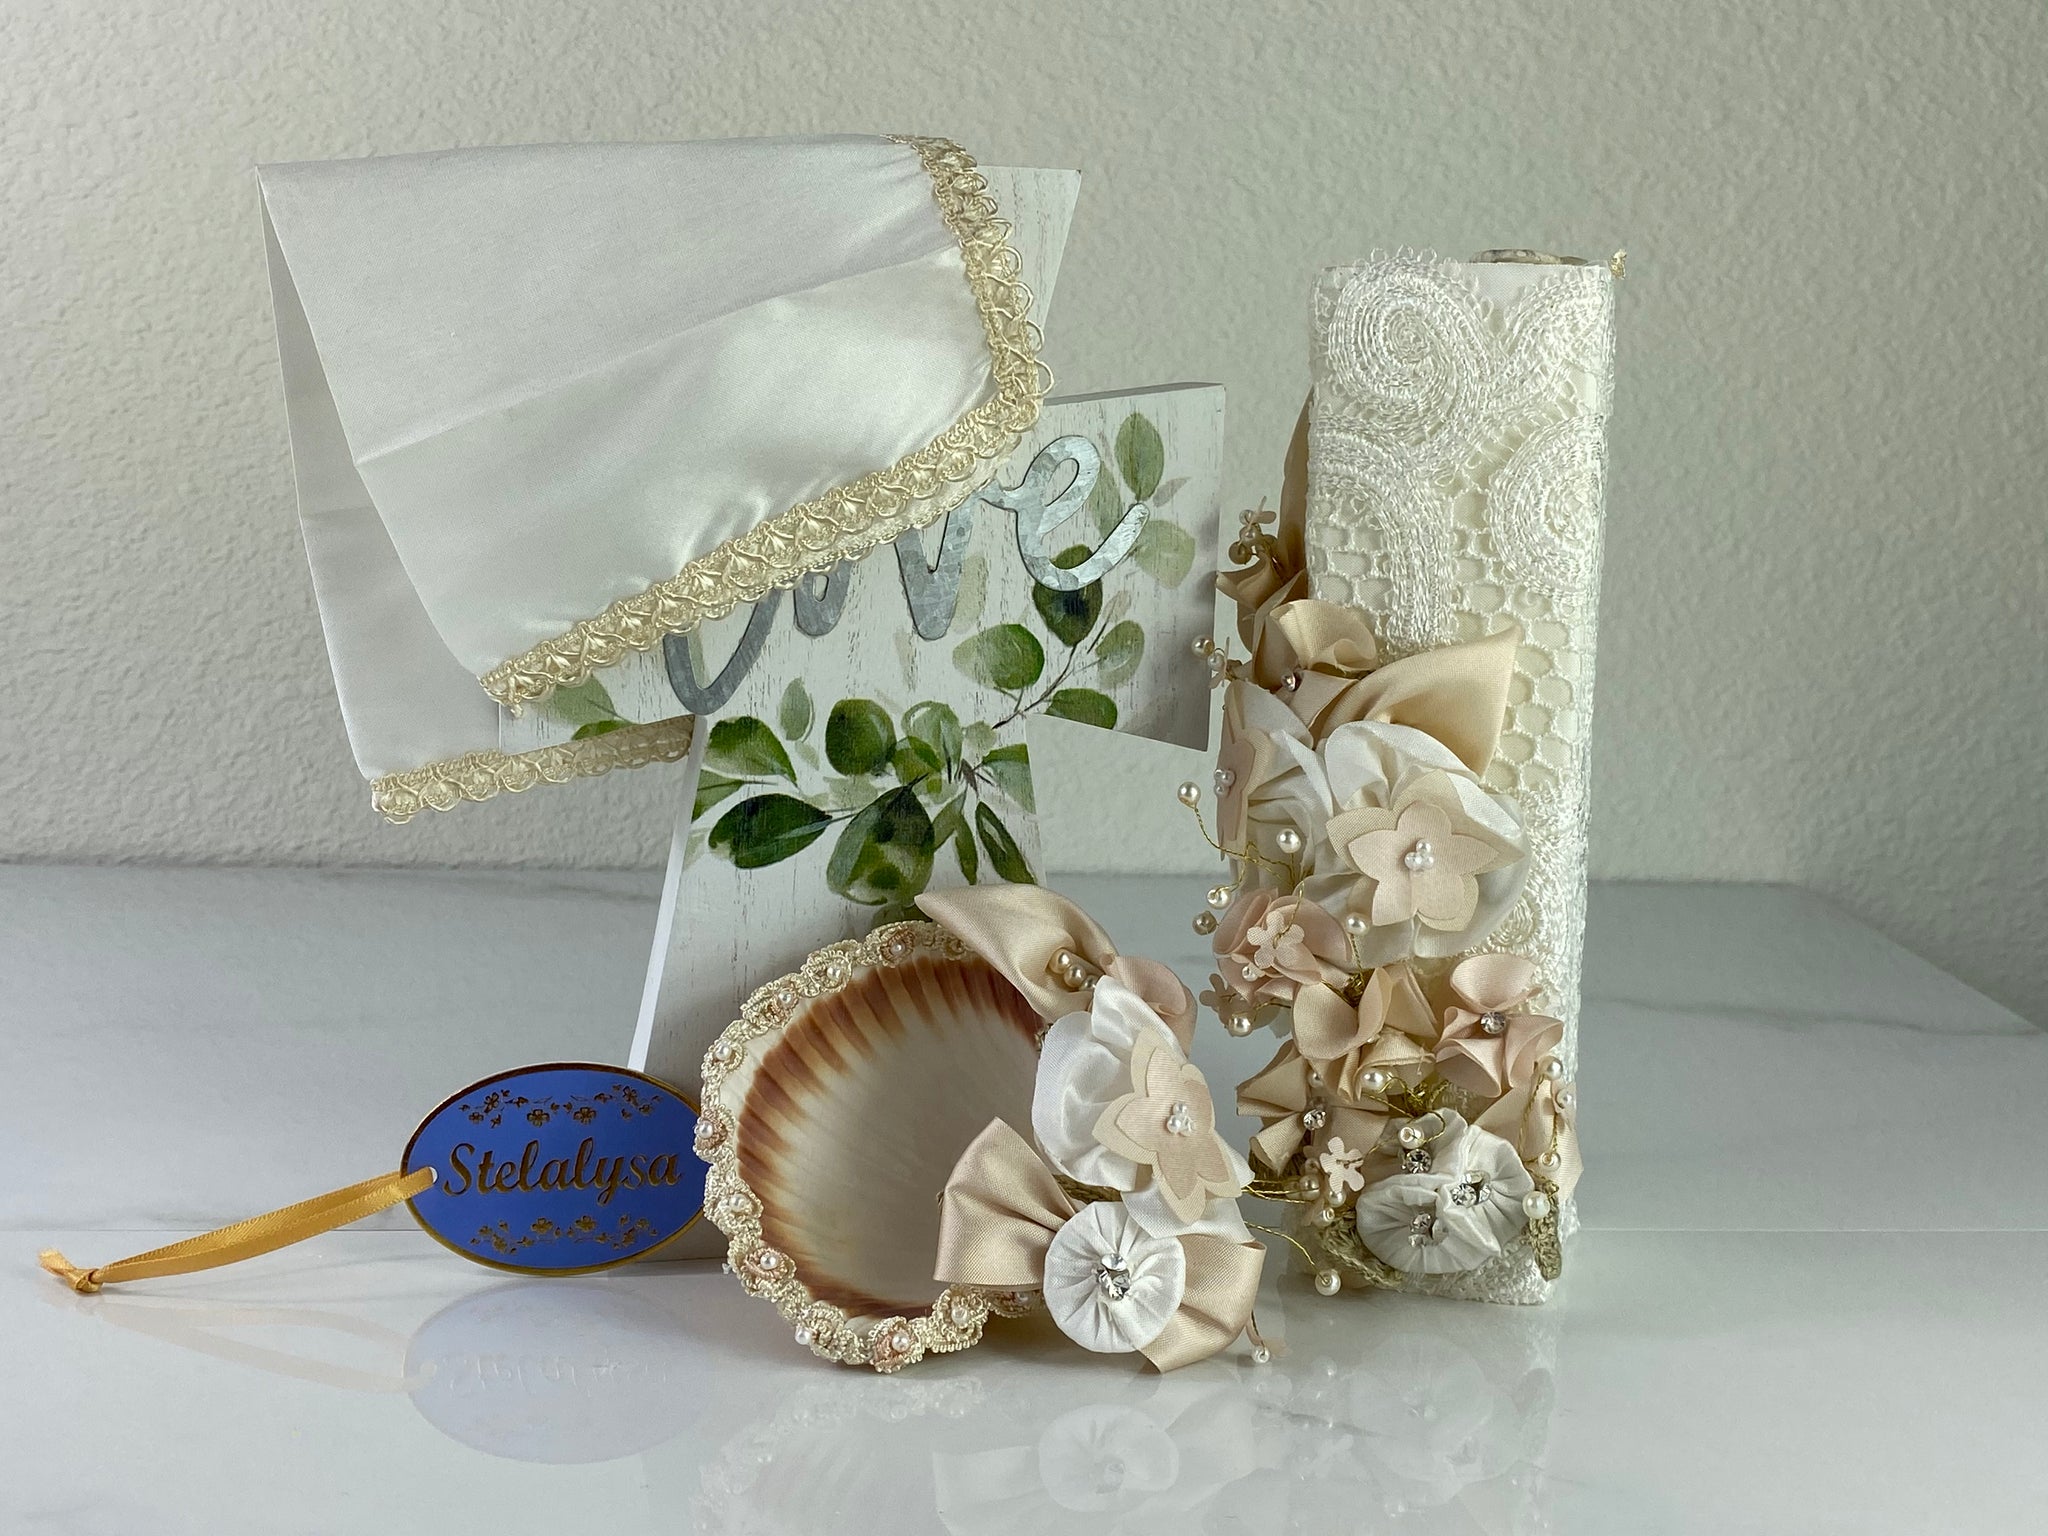 These one-of-a-kind Candle set is handmade and ivory in color.  This candle can also be use with a white baptism outfit because it has an array of light colors including white.   It is uniquely decorated with ribbon, pearls, crystals, flowers, and beads making it a gorgeous keepsake.   This candle is rectangular in shape.    To match, the Shell is put together piece by piece to compliment the Candle and Handkerchief.  